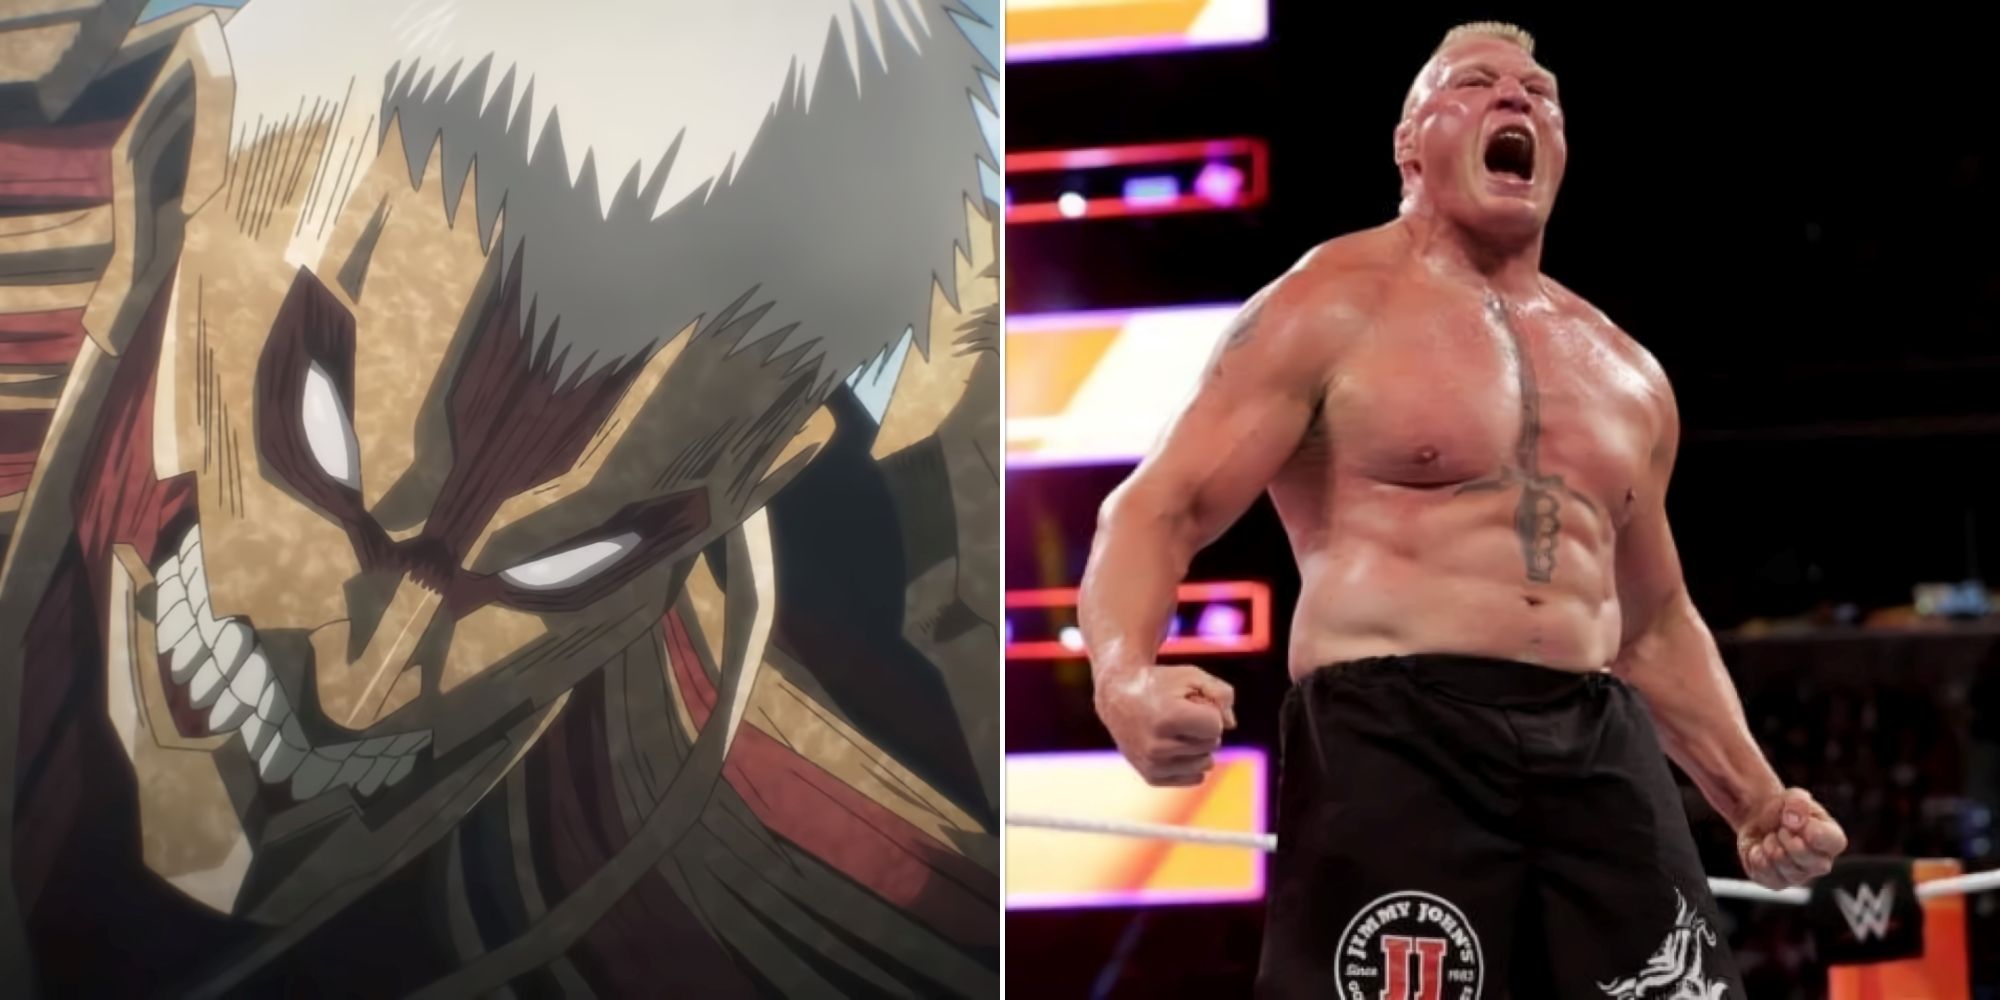 Collage of the Armored Titan and Brock Lesnar